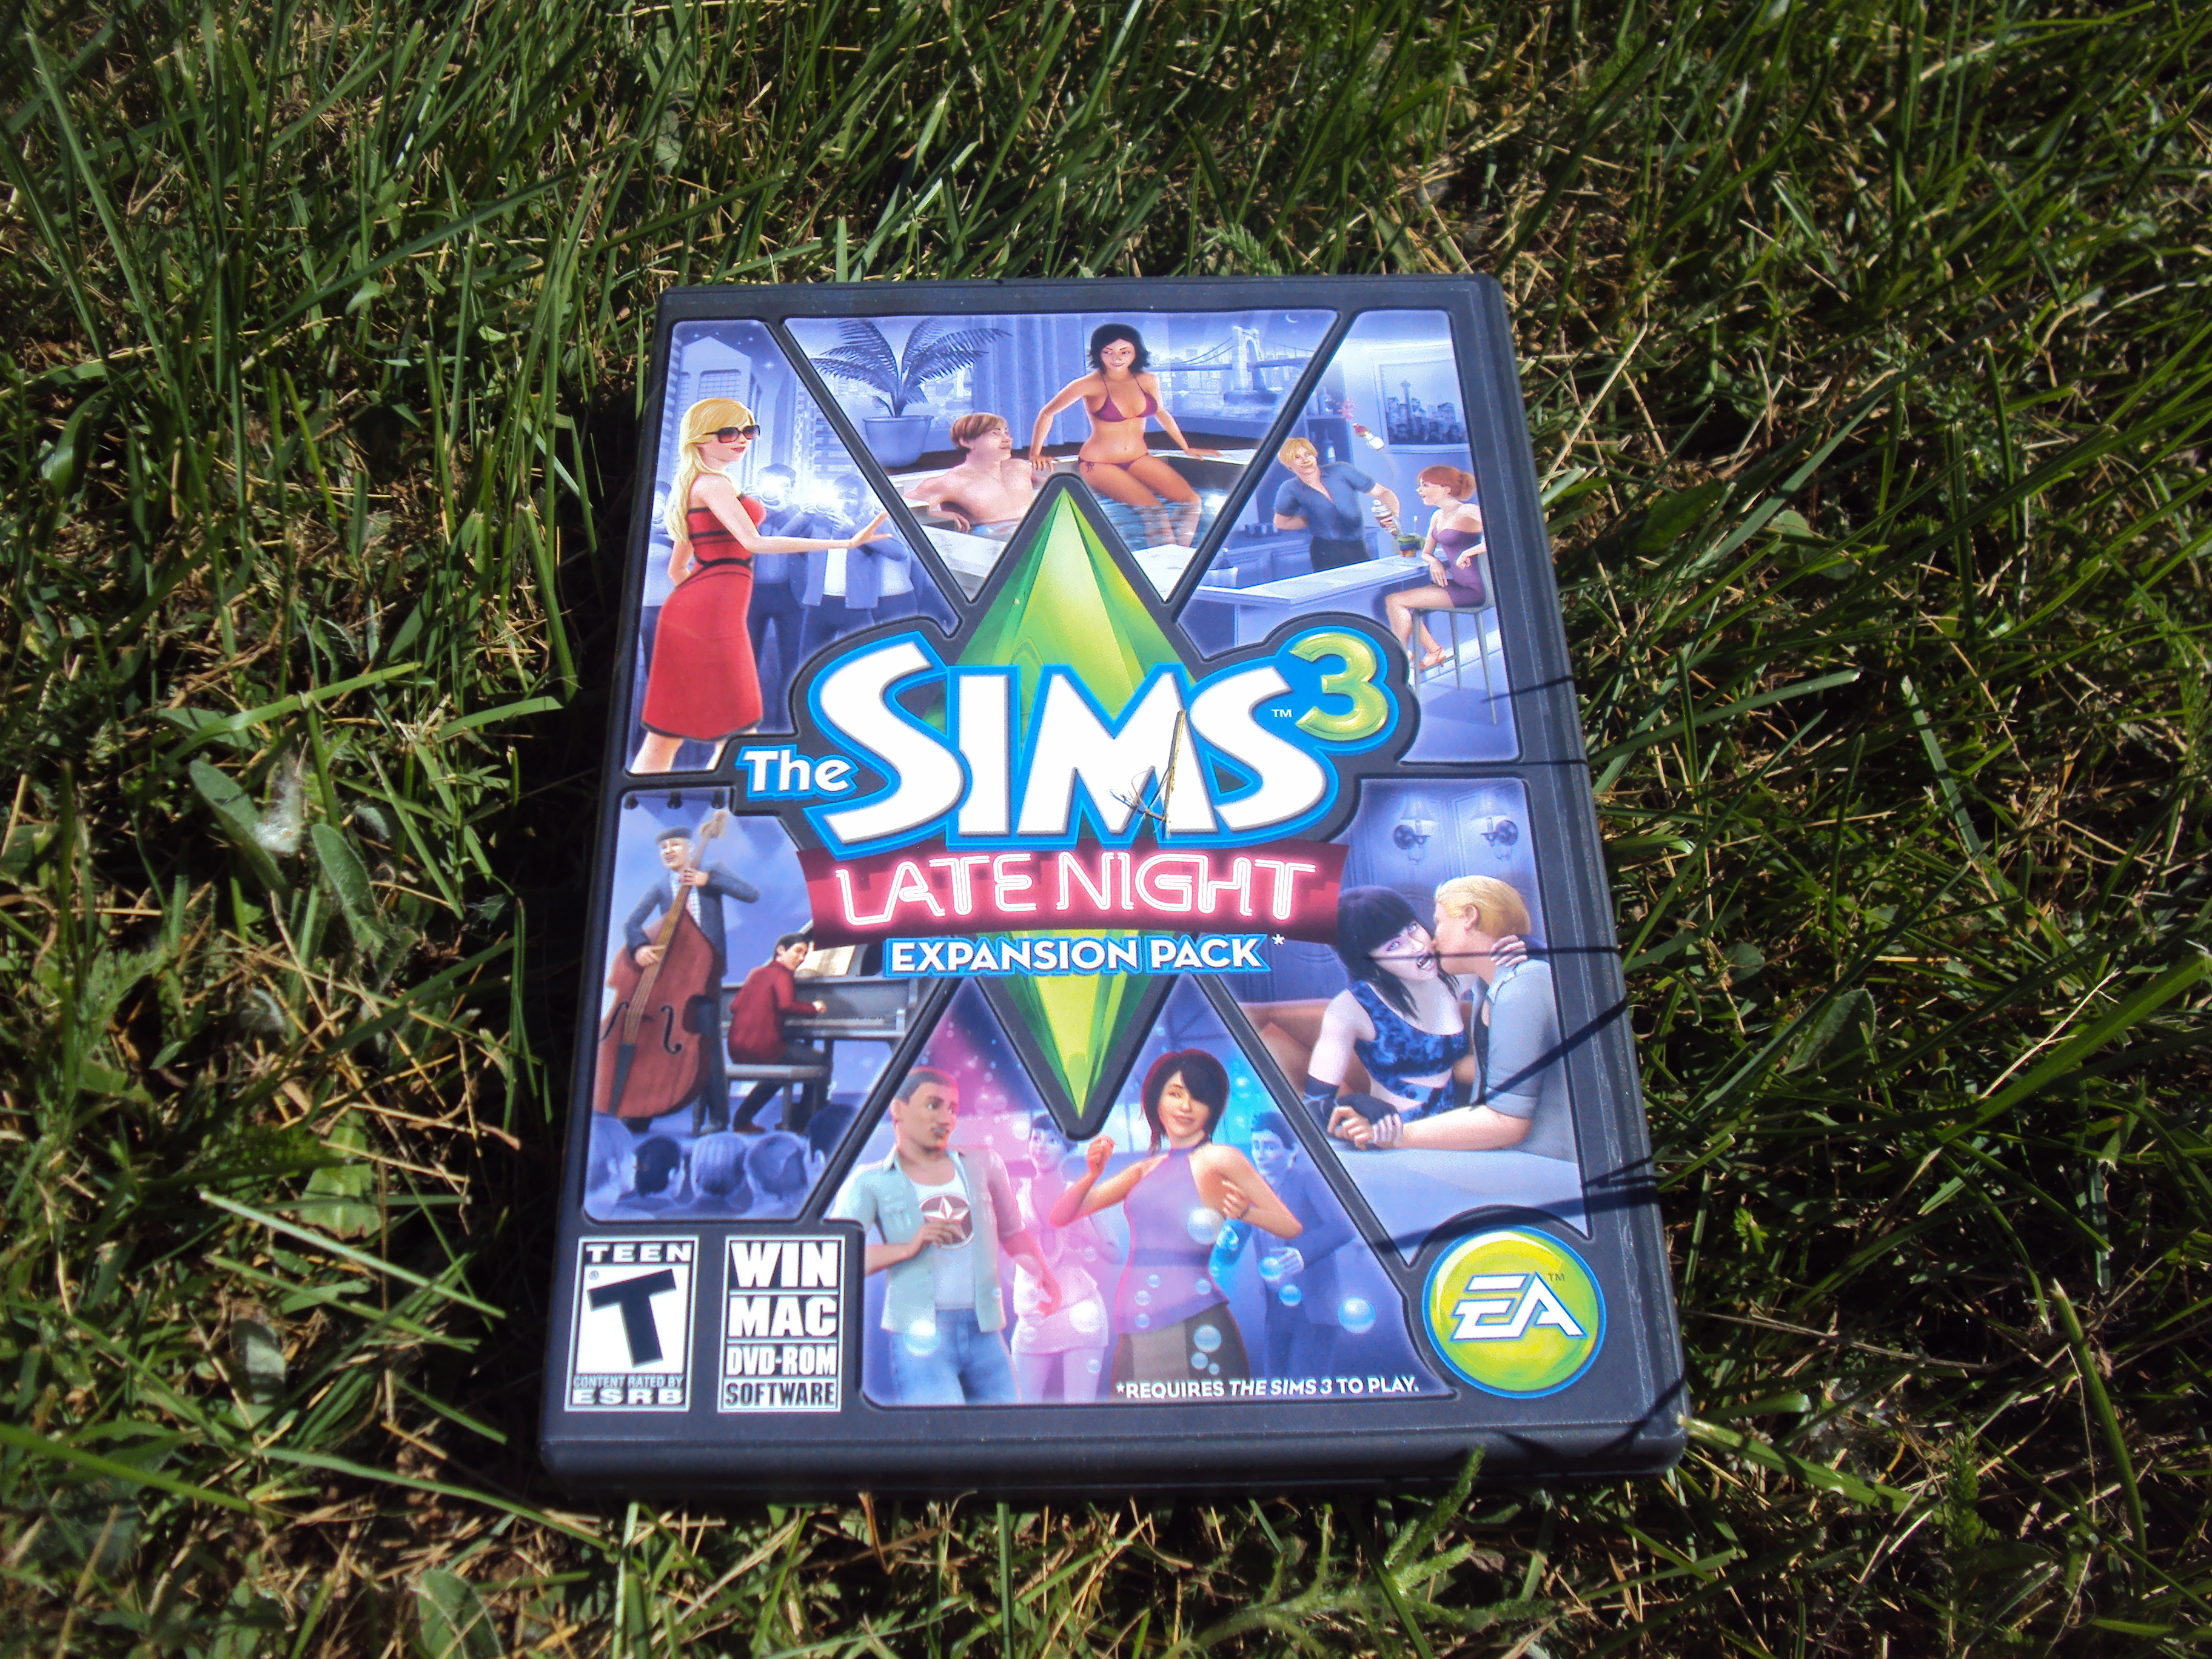 All the sims 3 games